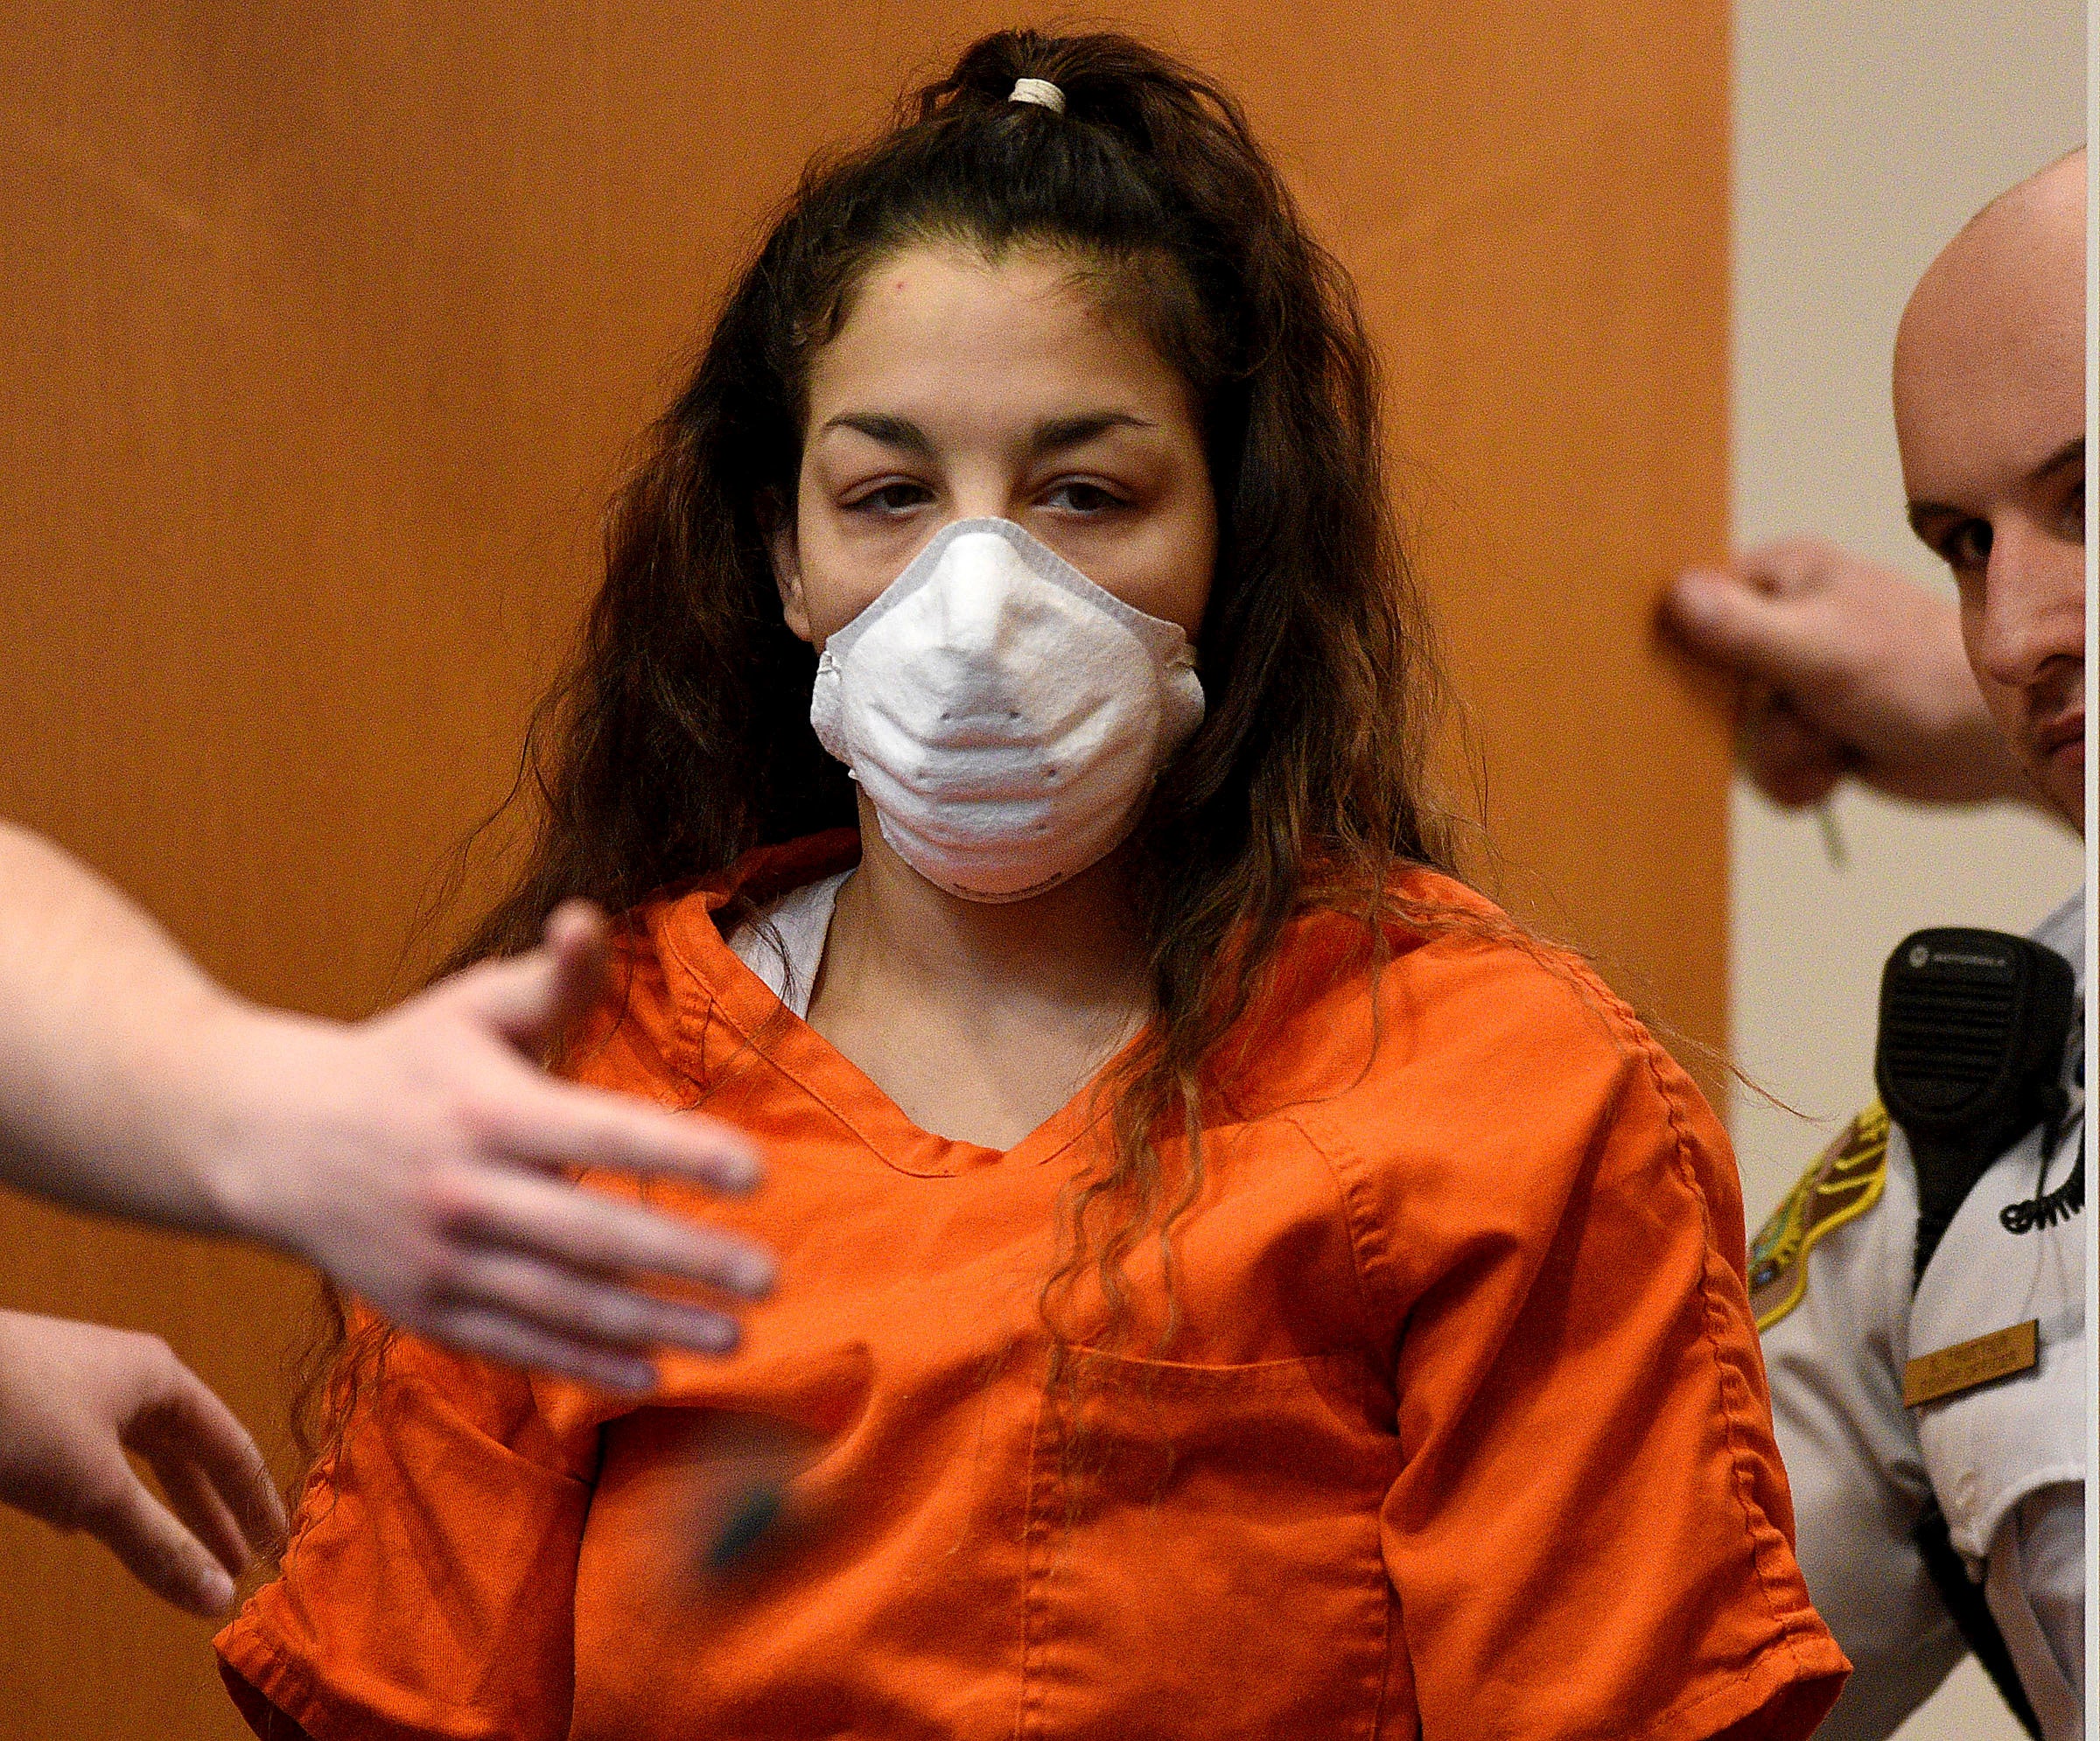 Kayla Montgomery arrives for her plea and sentencing hearing at Hillsborough County Superior Court in Manchester, N.H., on 18 November 2022. Montgomery, the stepmother of a New Hampshire girl who disappeared in 2019 at age 5 and is presumed dead was sent to prison for at least a year and a half Friday after pleading guilty to perjury charges.